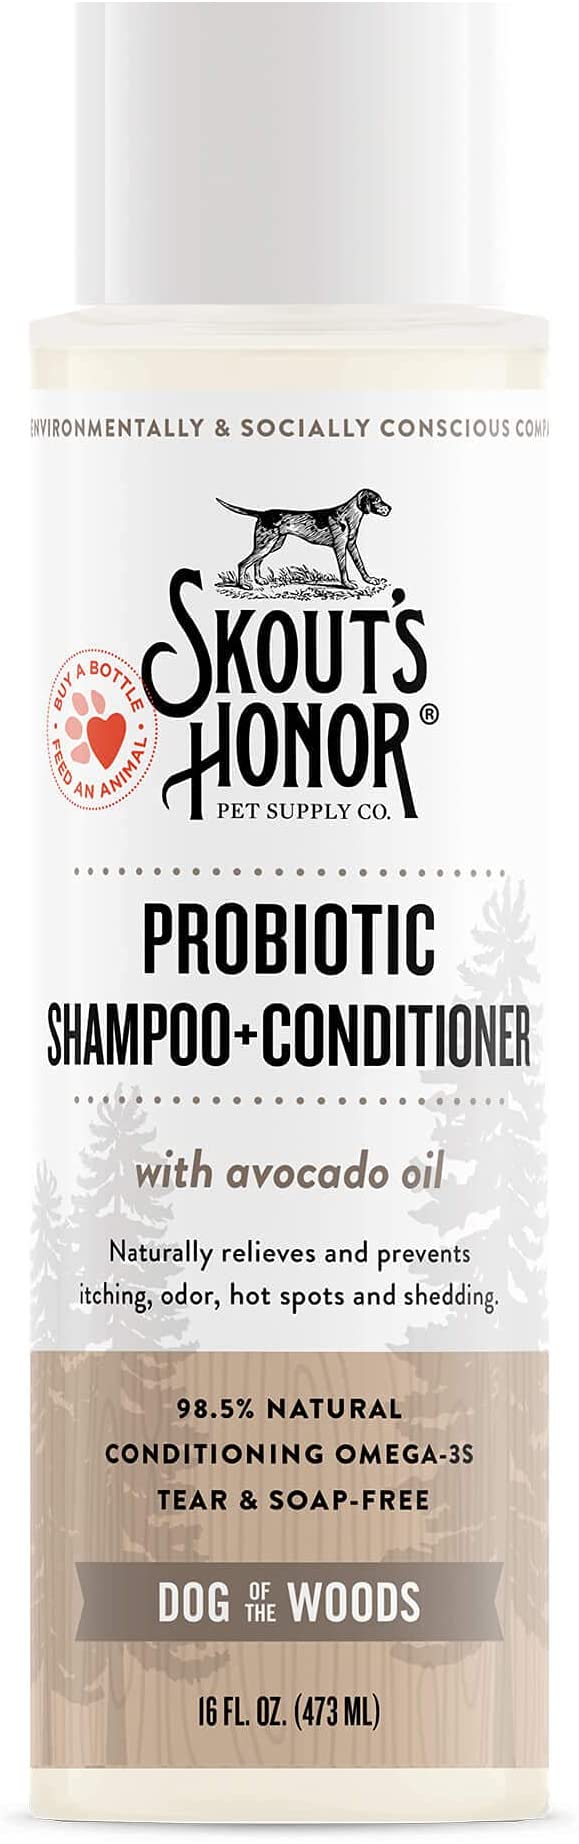 SKOUT'S HONOR: Probiotic Pet Shampoo & Conditioner - 2-in-1 with Avocado Oil - Cleans and Conditions Fur, Supports Pet's Natural Defenses, PH-Balanced, Sulfate Free